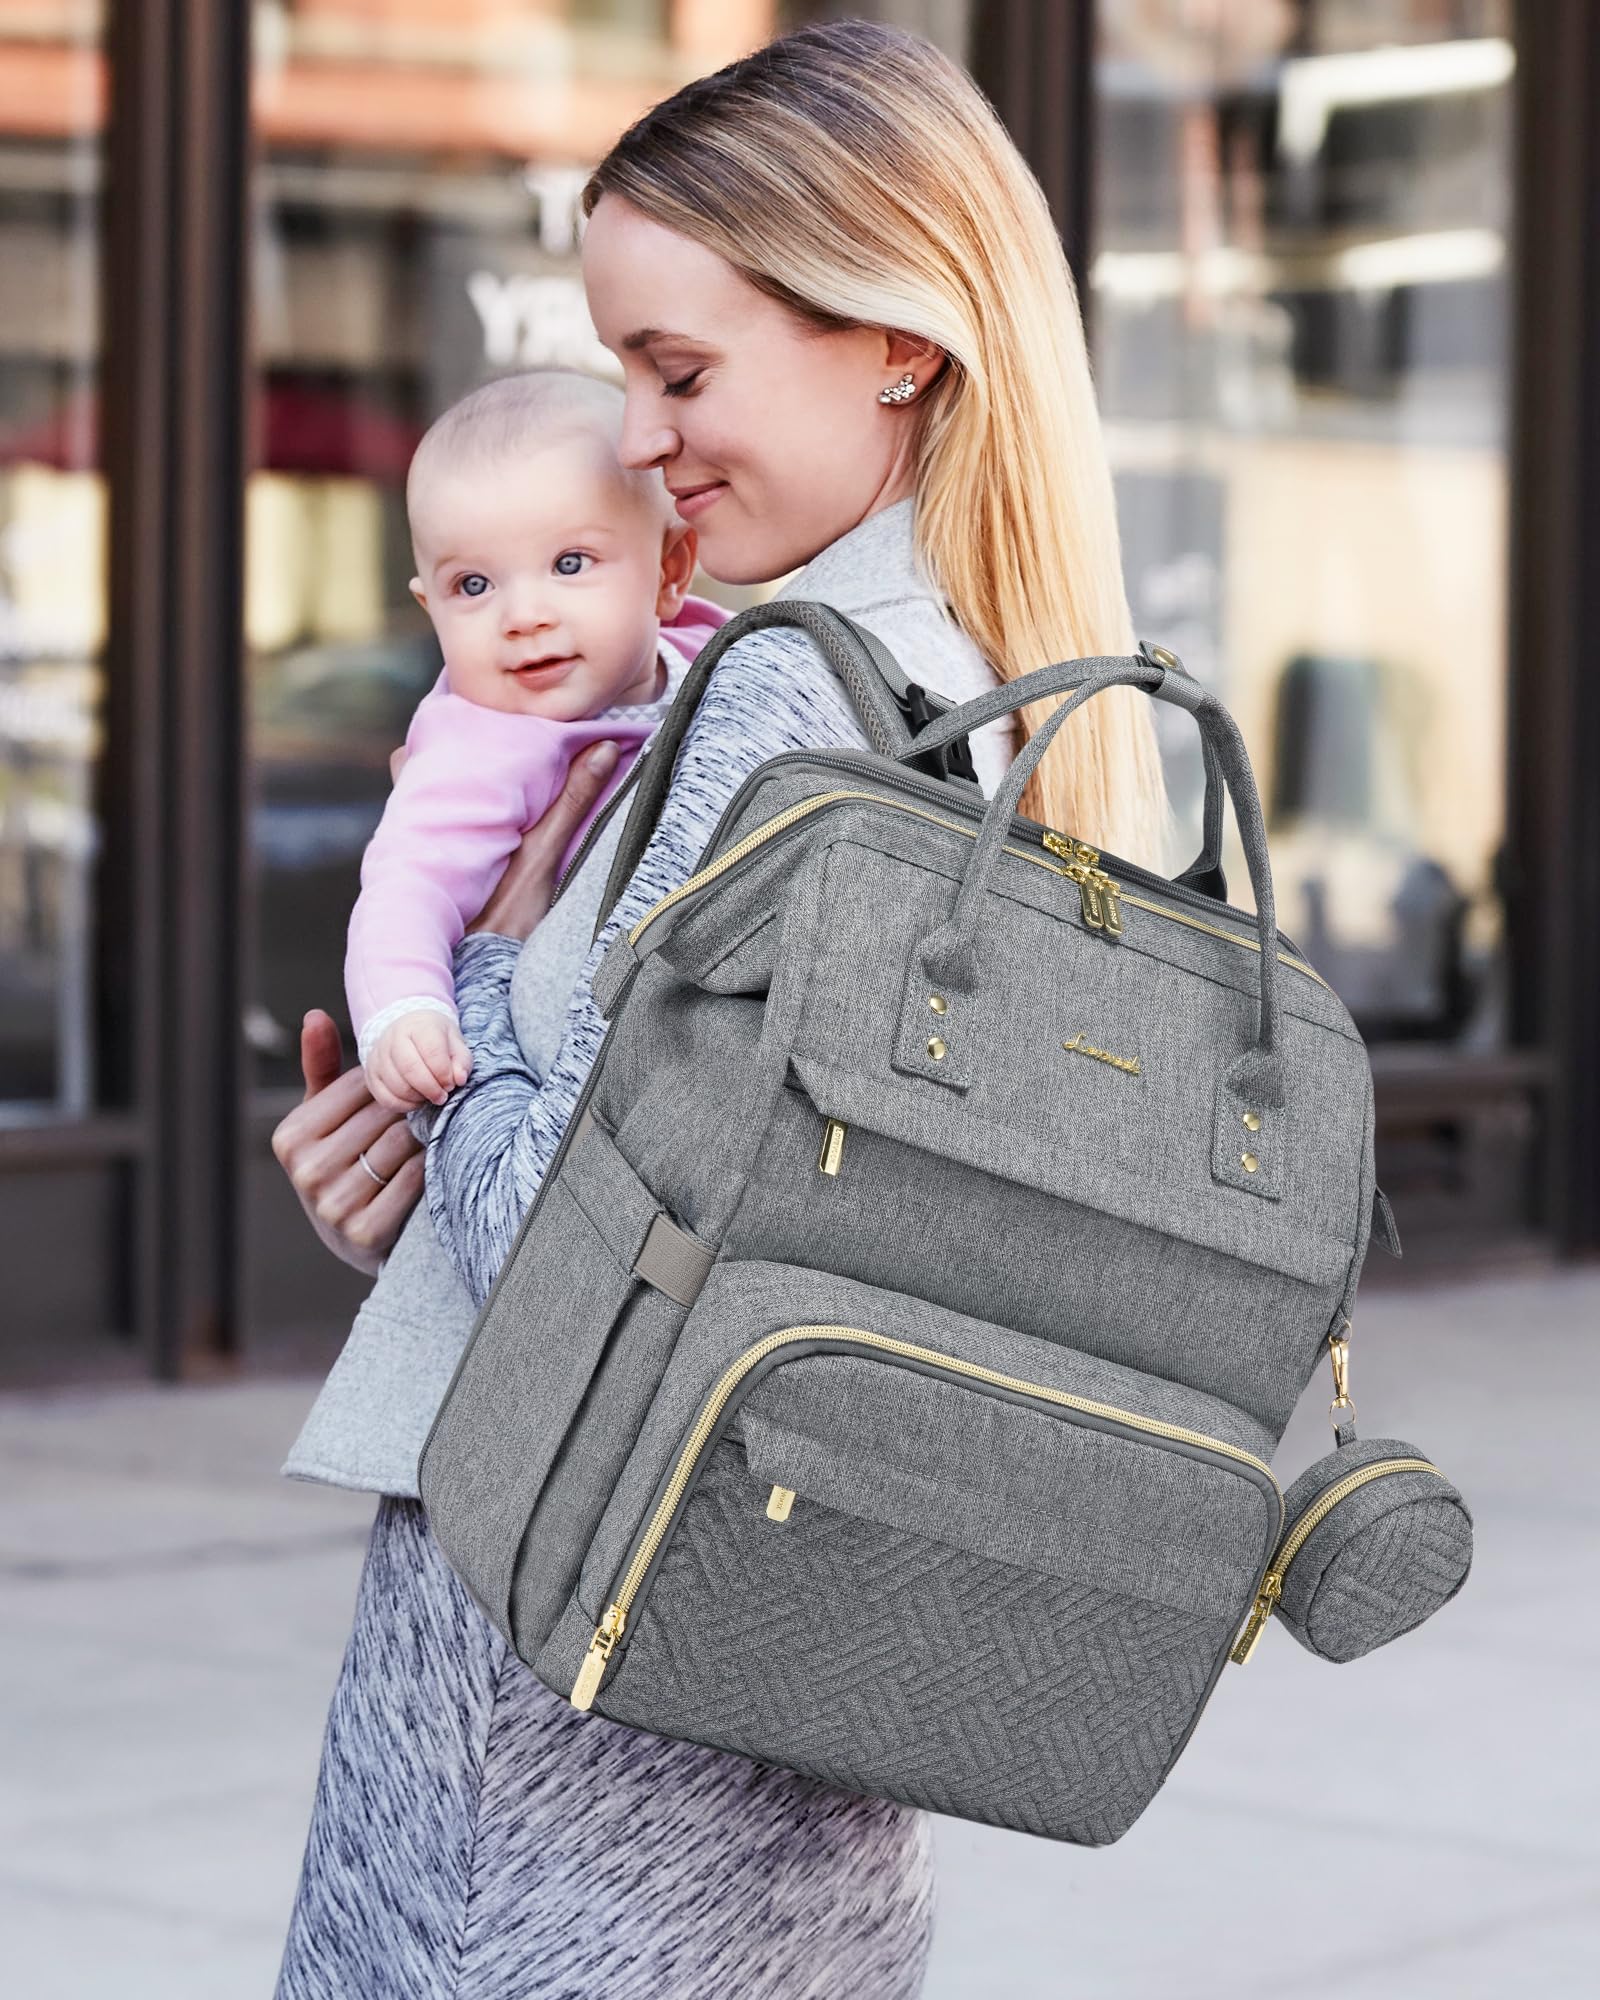 LOVEVOOK Diaper Bag Backpack, Multi functions Baby Bags with Diaper Compartments, Large Nappy Bag with Changing Pad & Pacifier Case, Unisex Travel Diaper Back Pack, Waterproof & Stylish, Grey